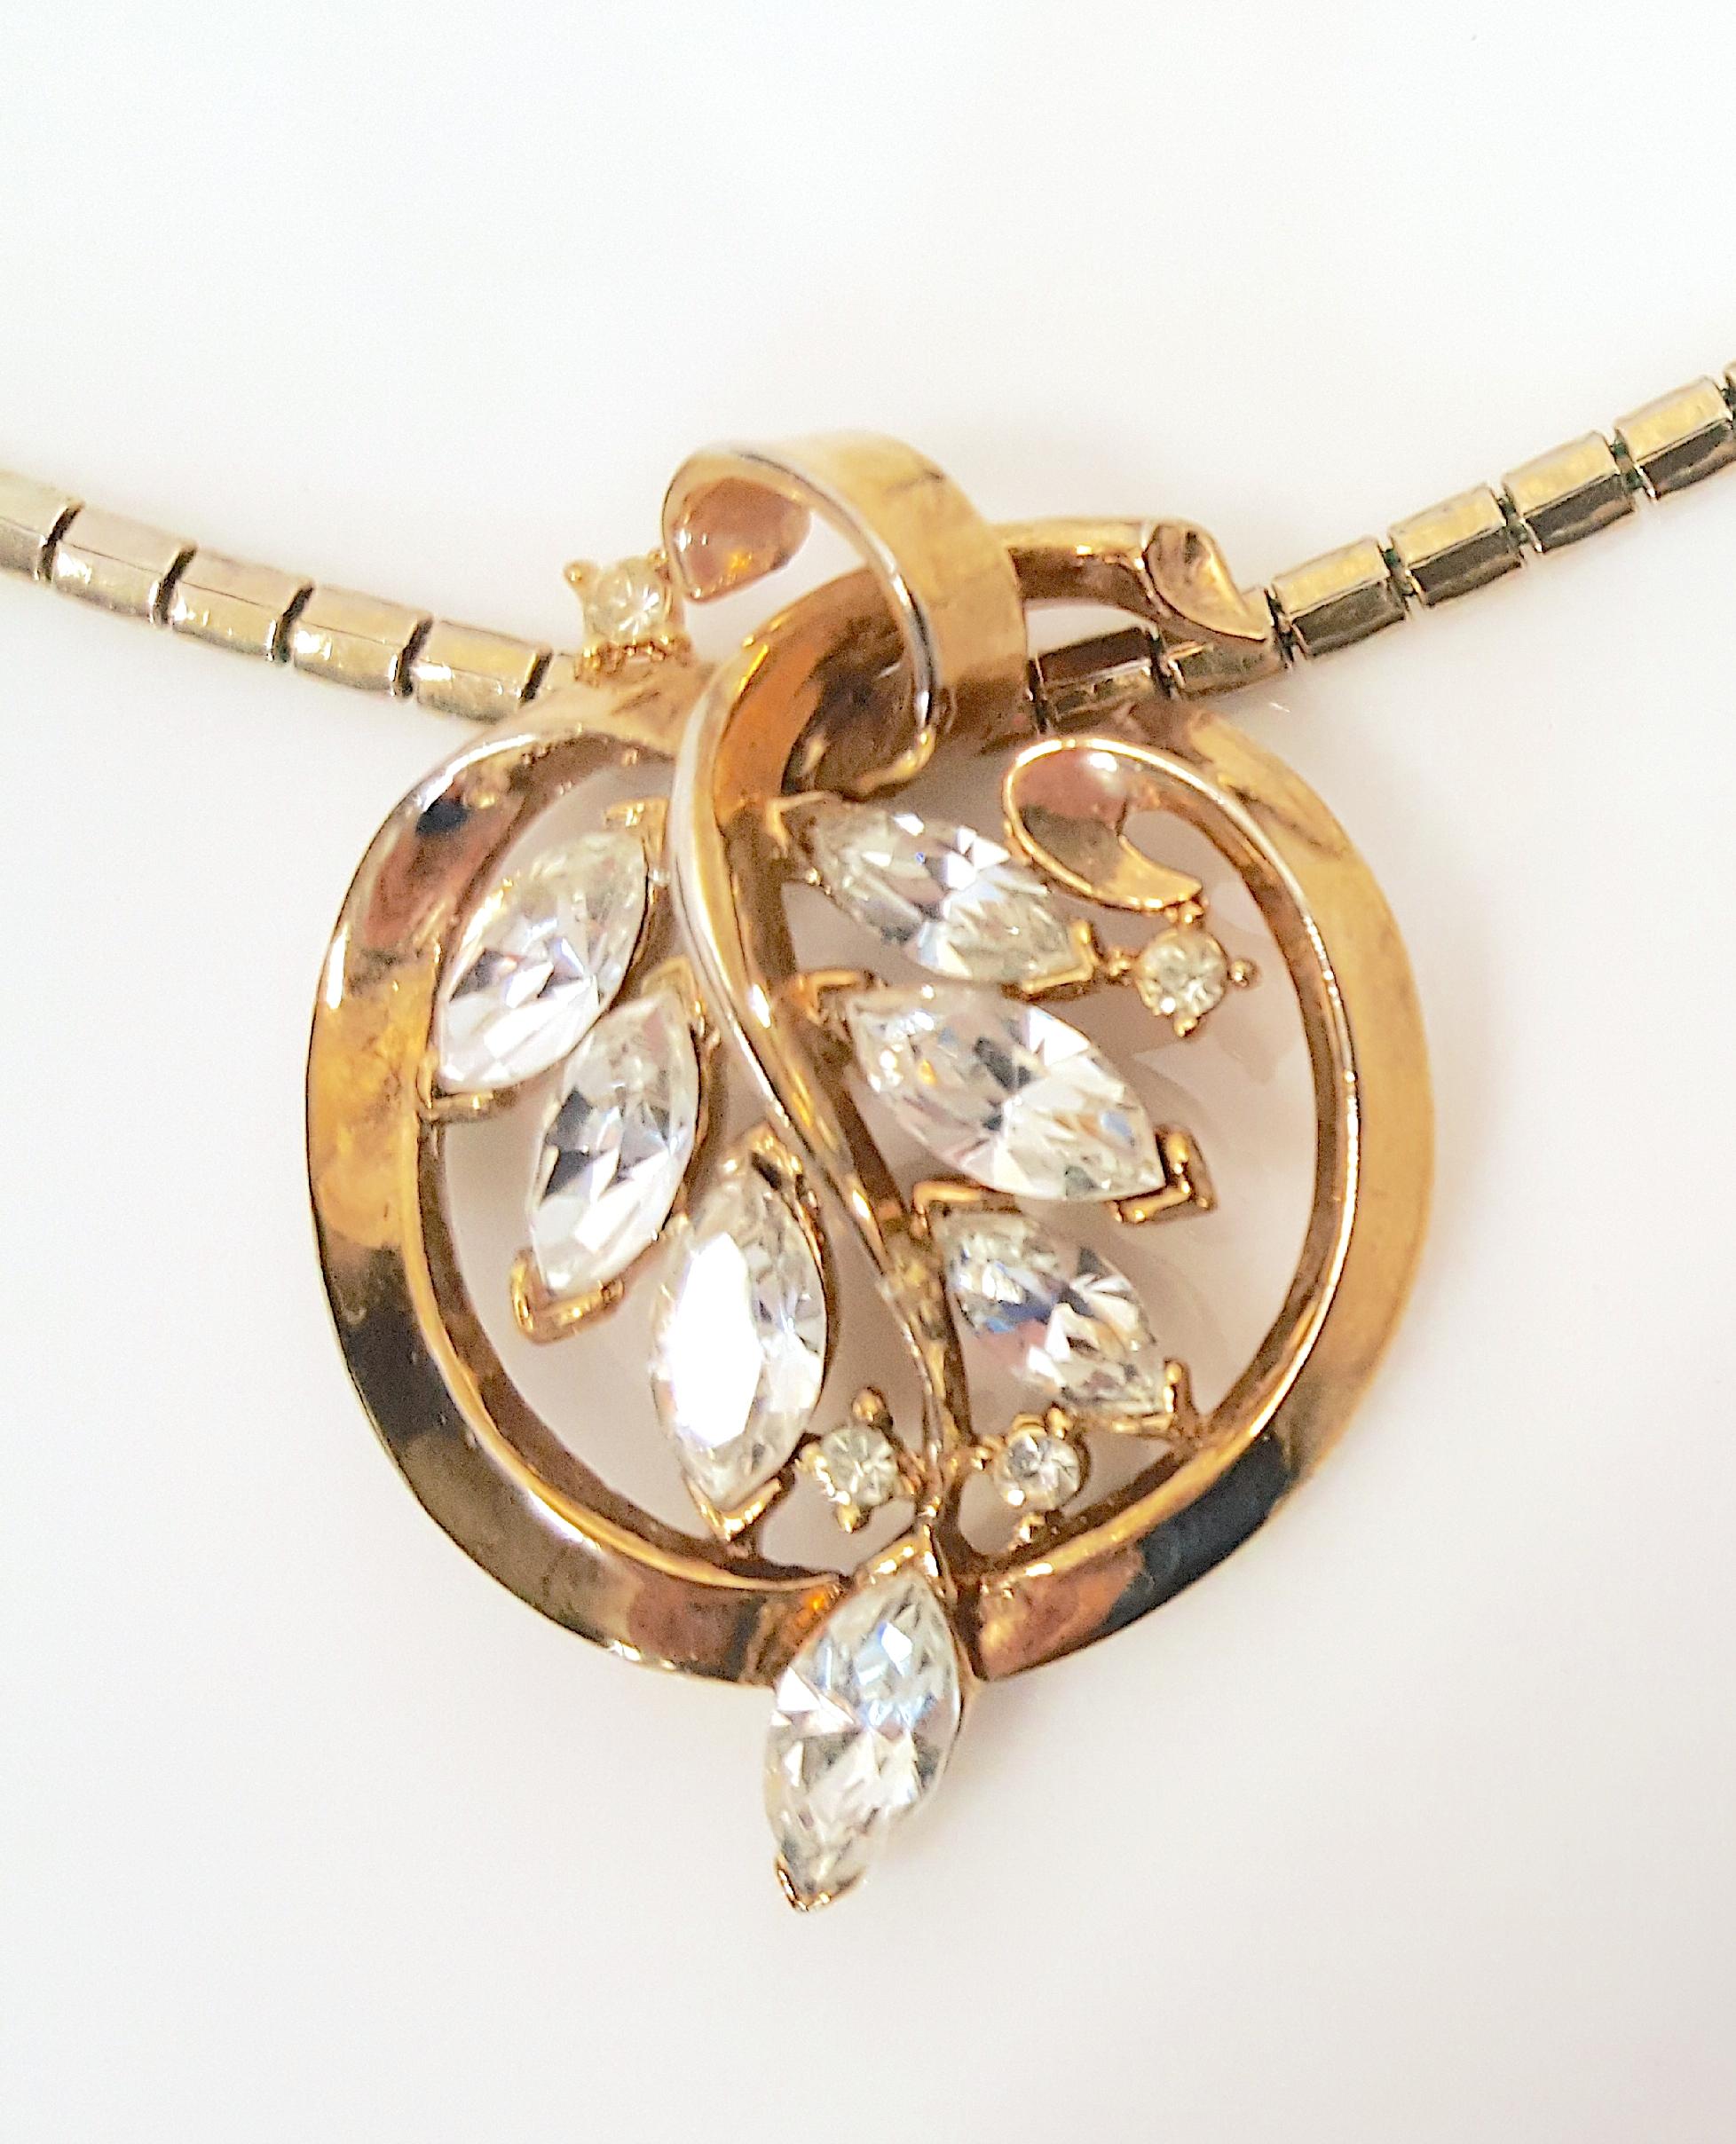 Modern CrownTrifari 1940s Philippe RareParure InvisiblySetCrystal EarringBroochNecklace For Sale